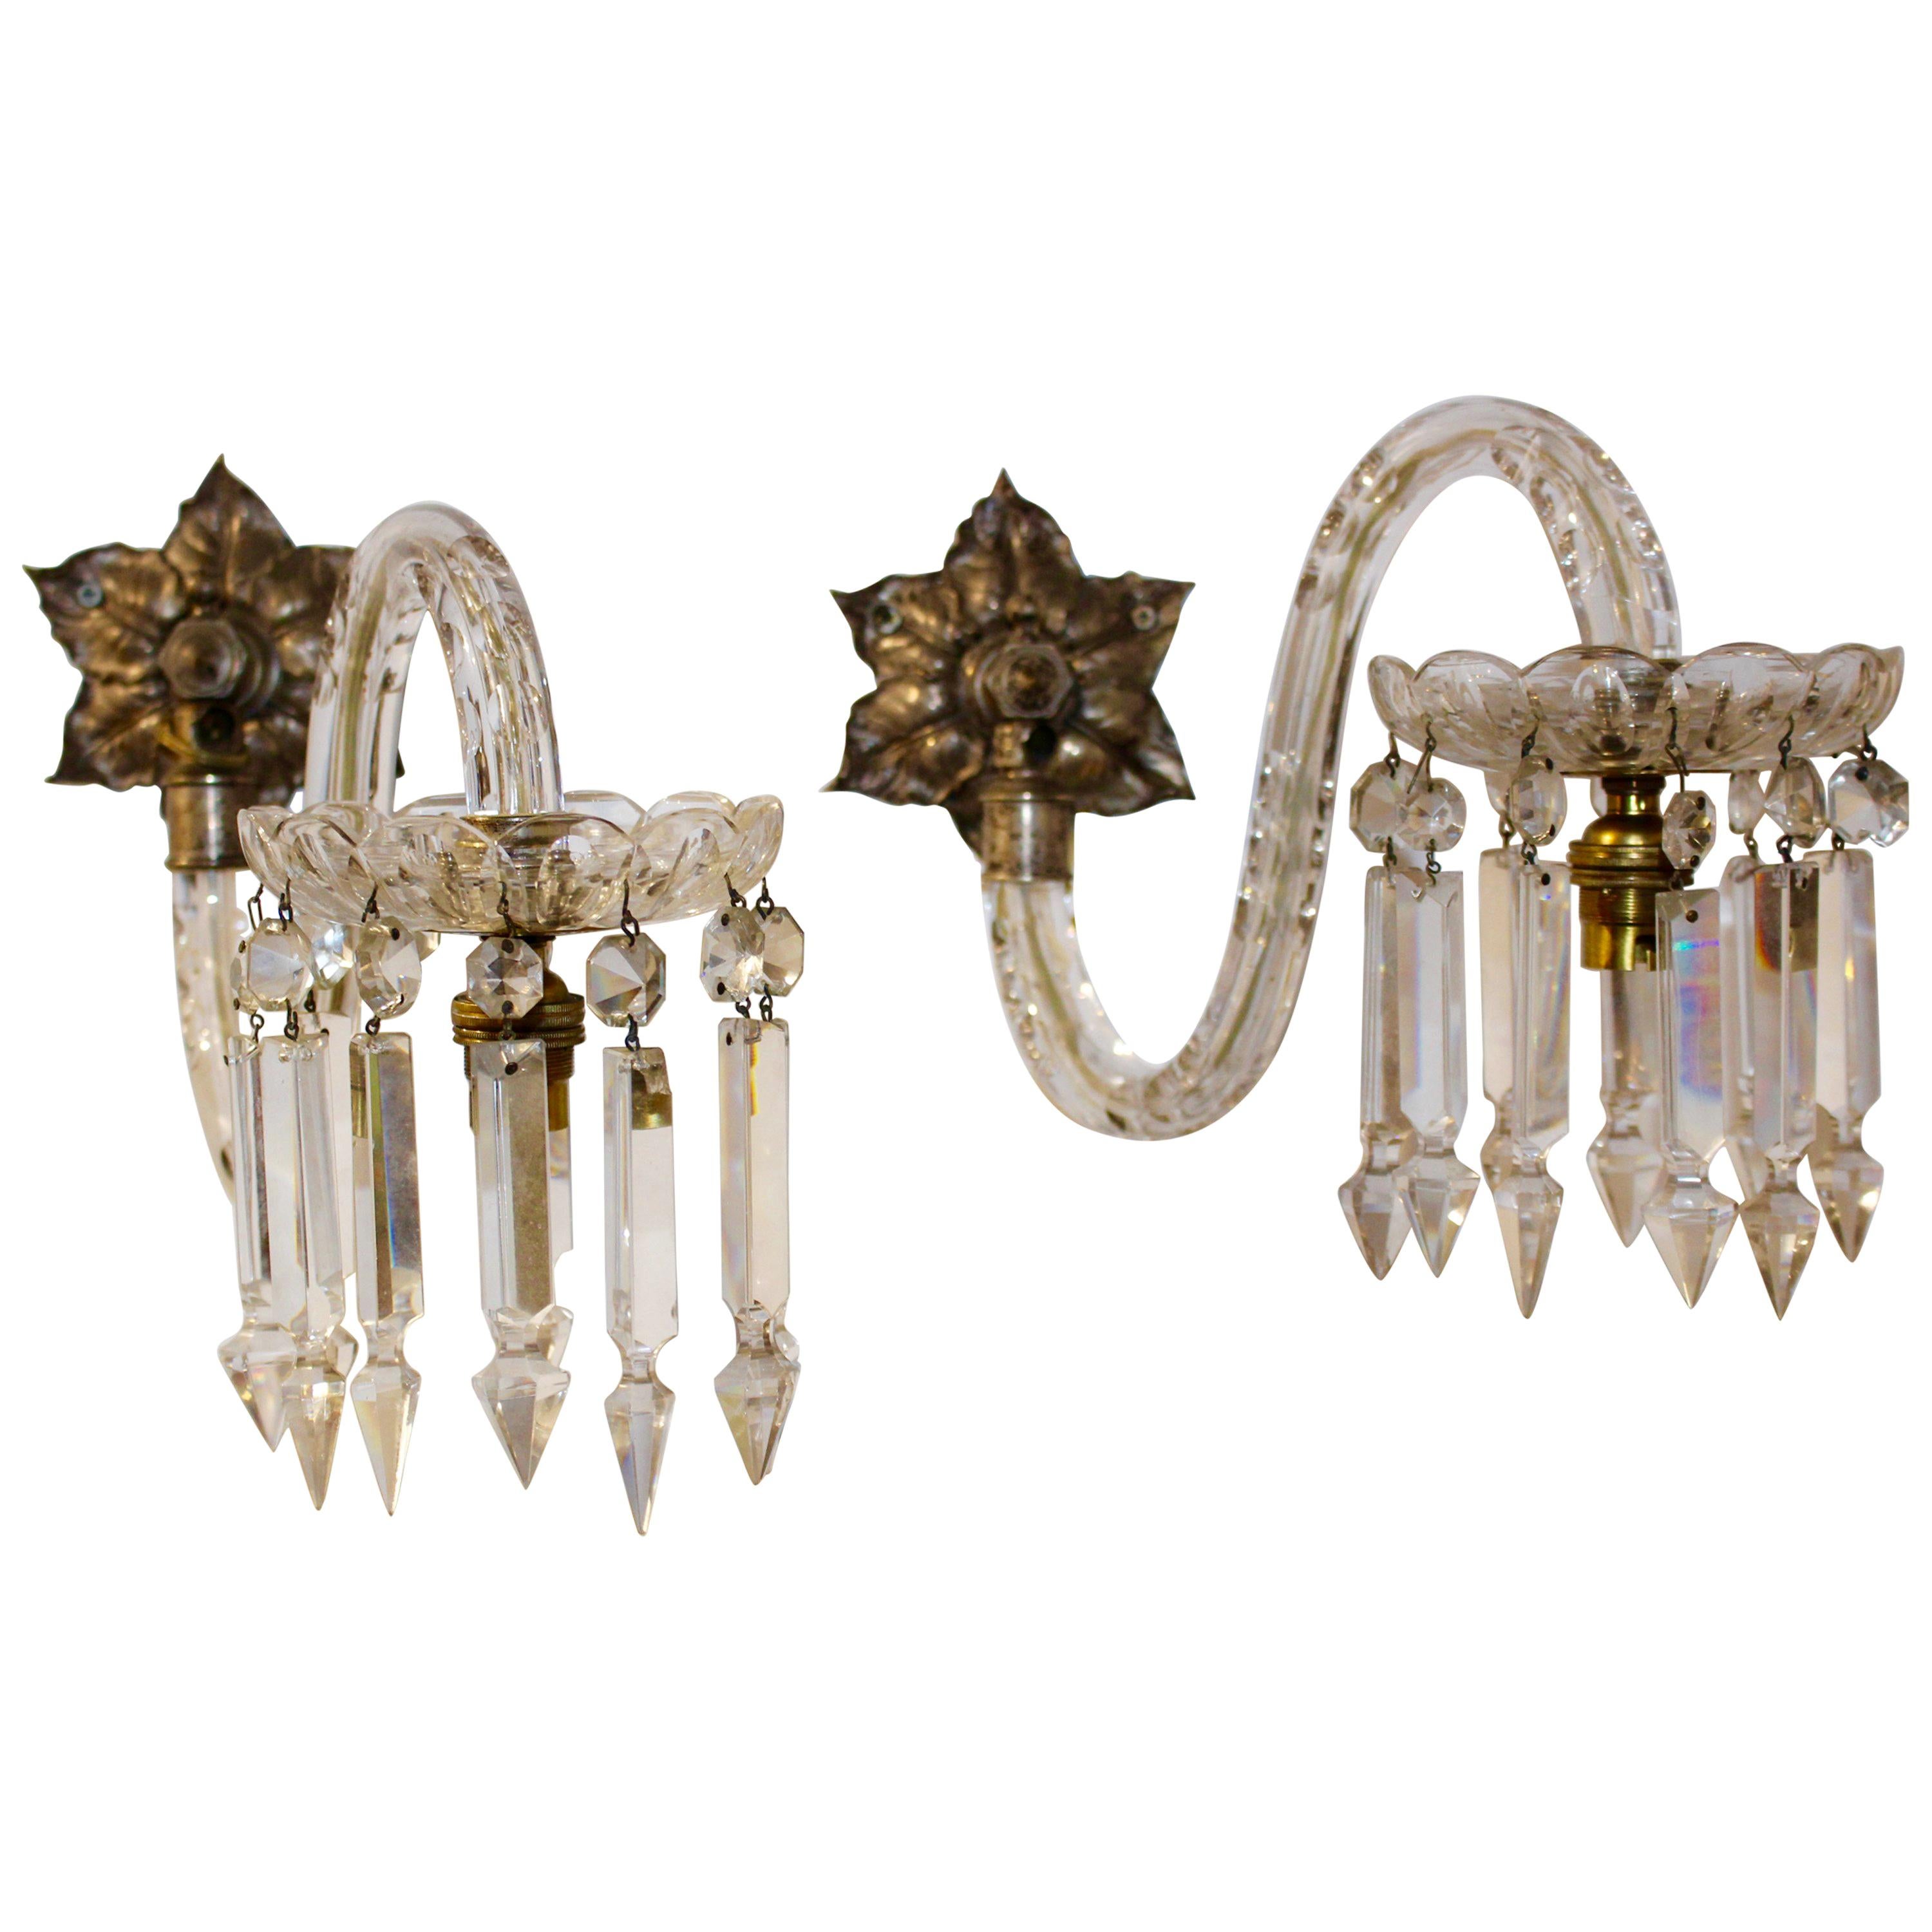 Early 20th Century Crystal Wall Lamp Scones im Angebot